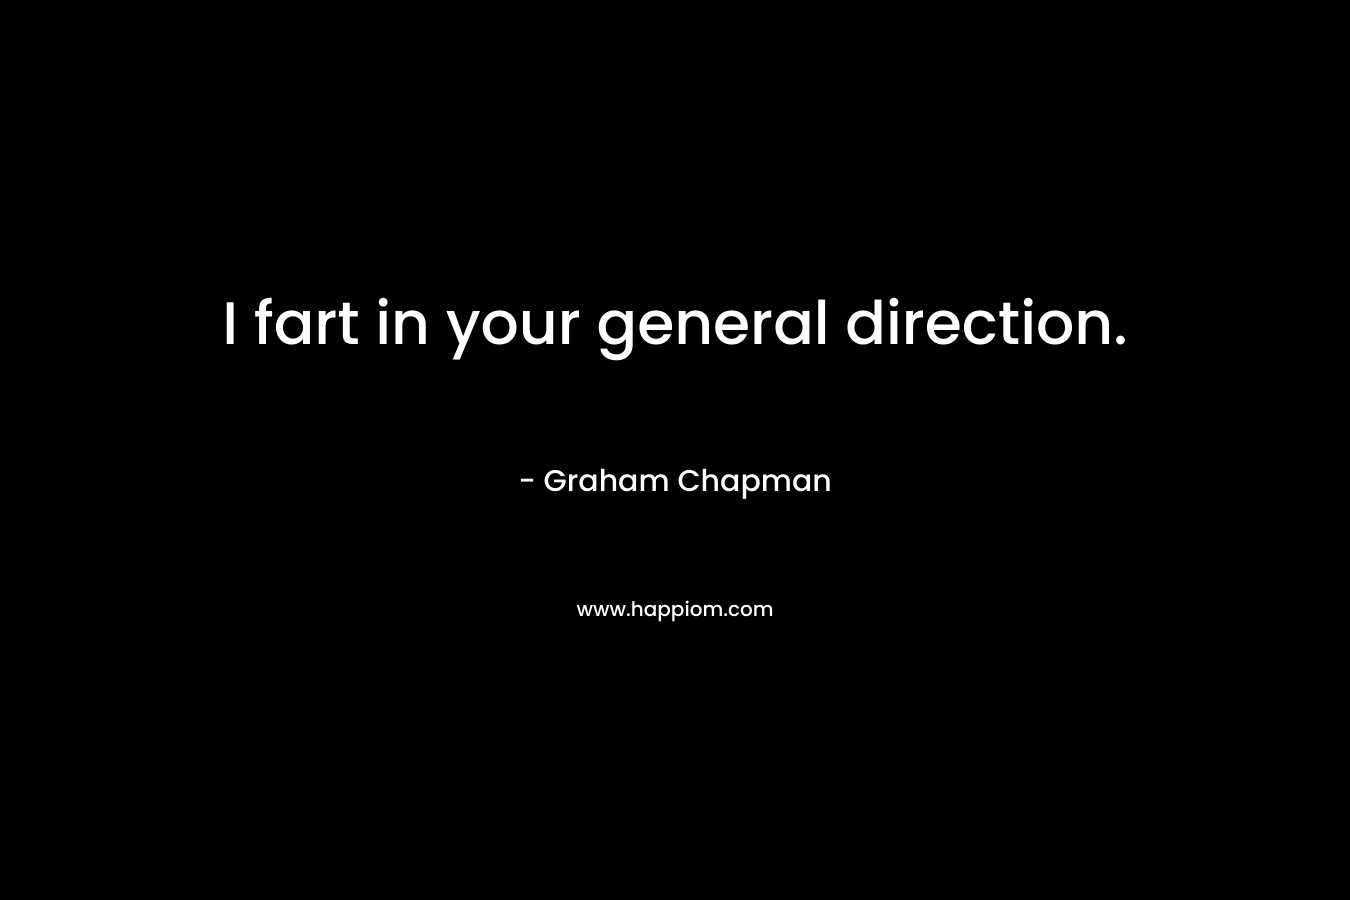 I fart in your general direction.